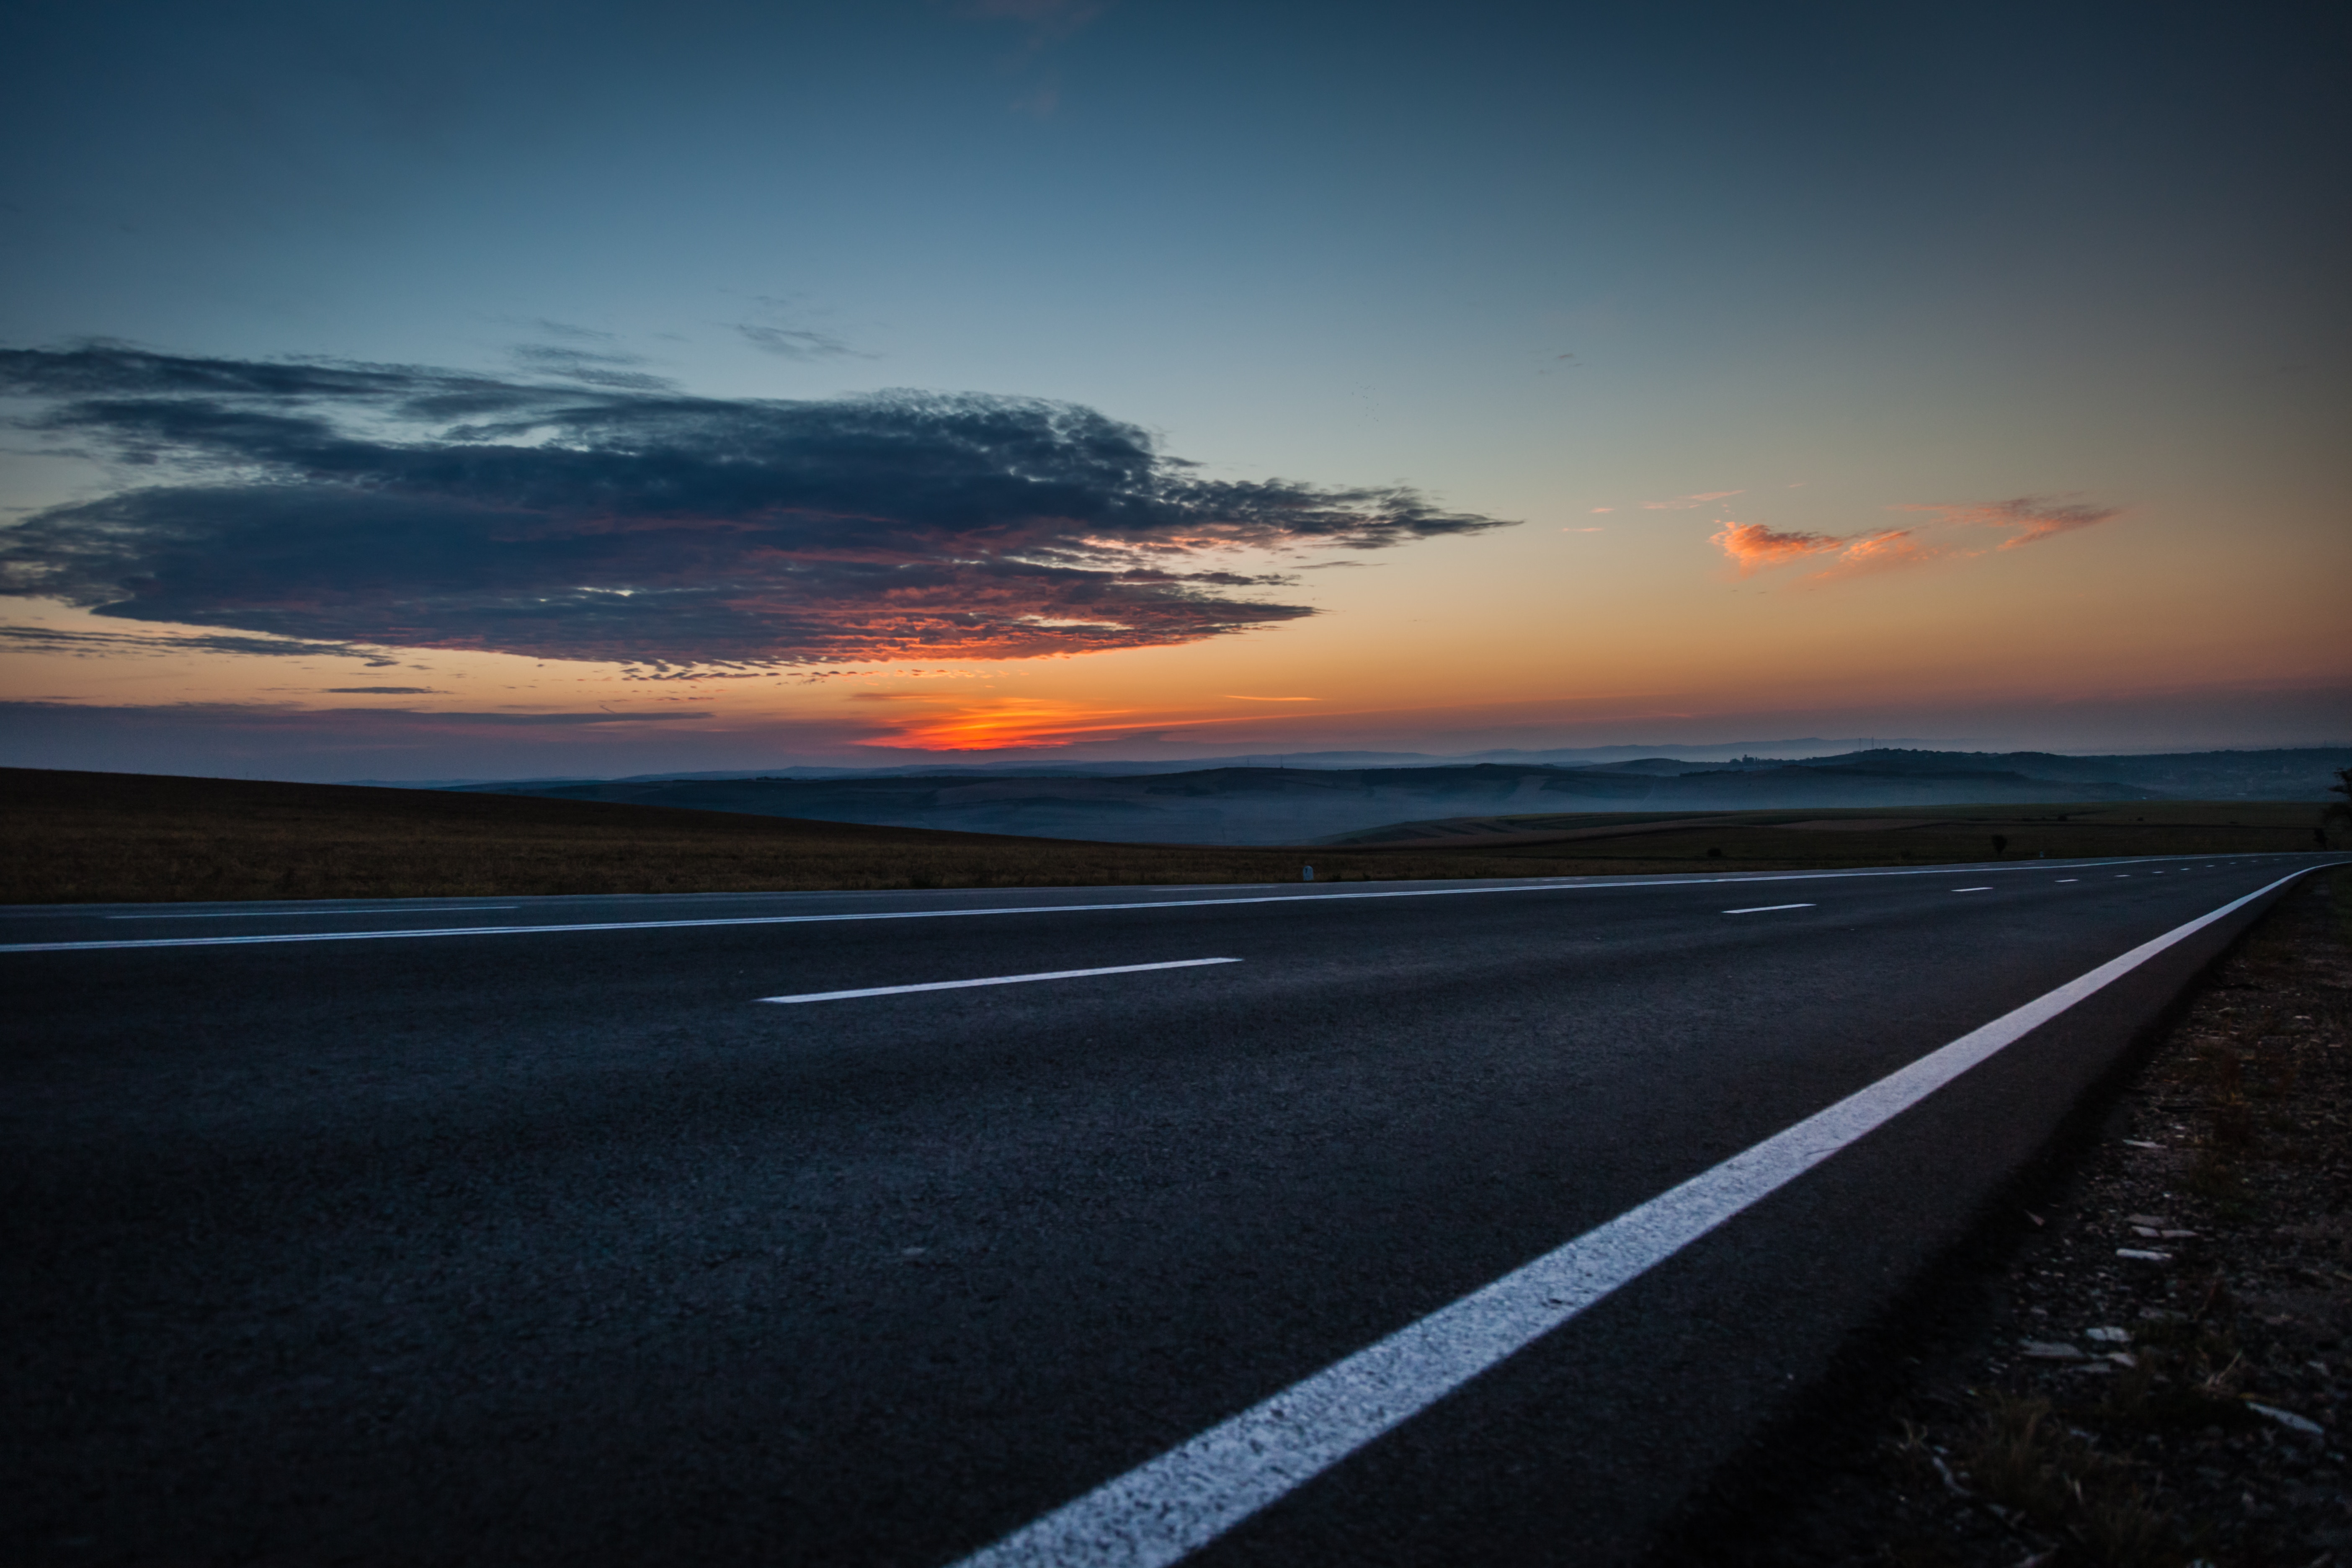 Download wallpaper 5616x3744 road, sky, clouds, marking hd background